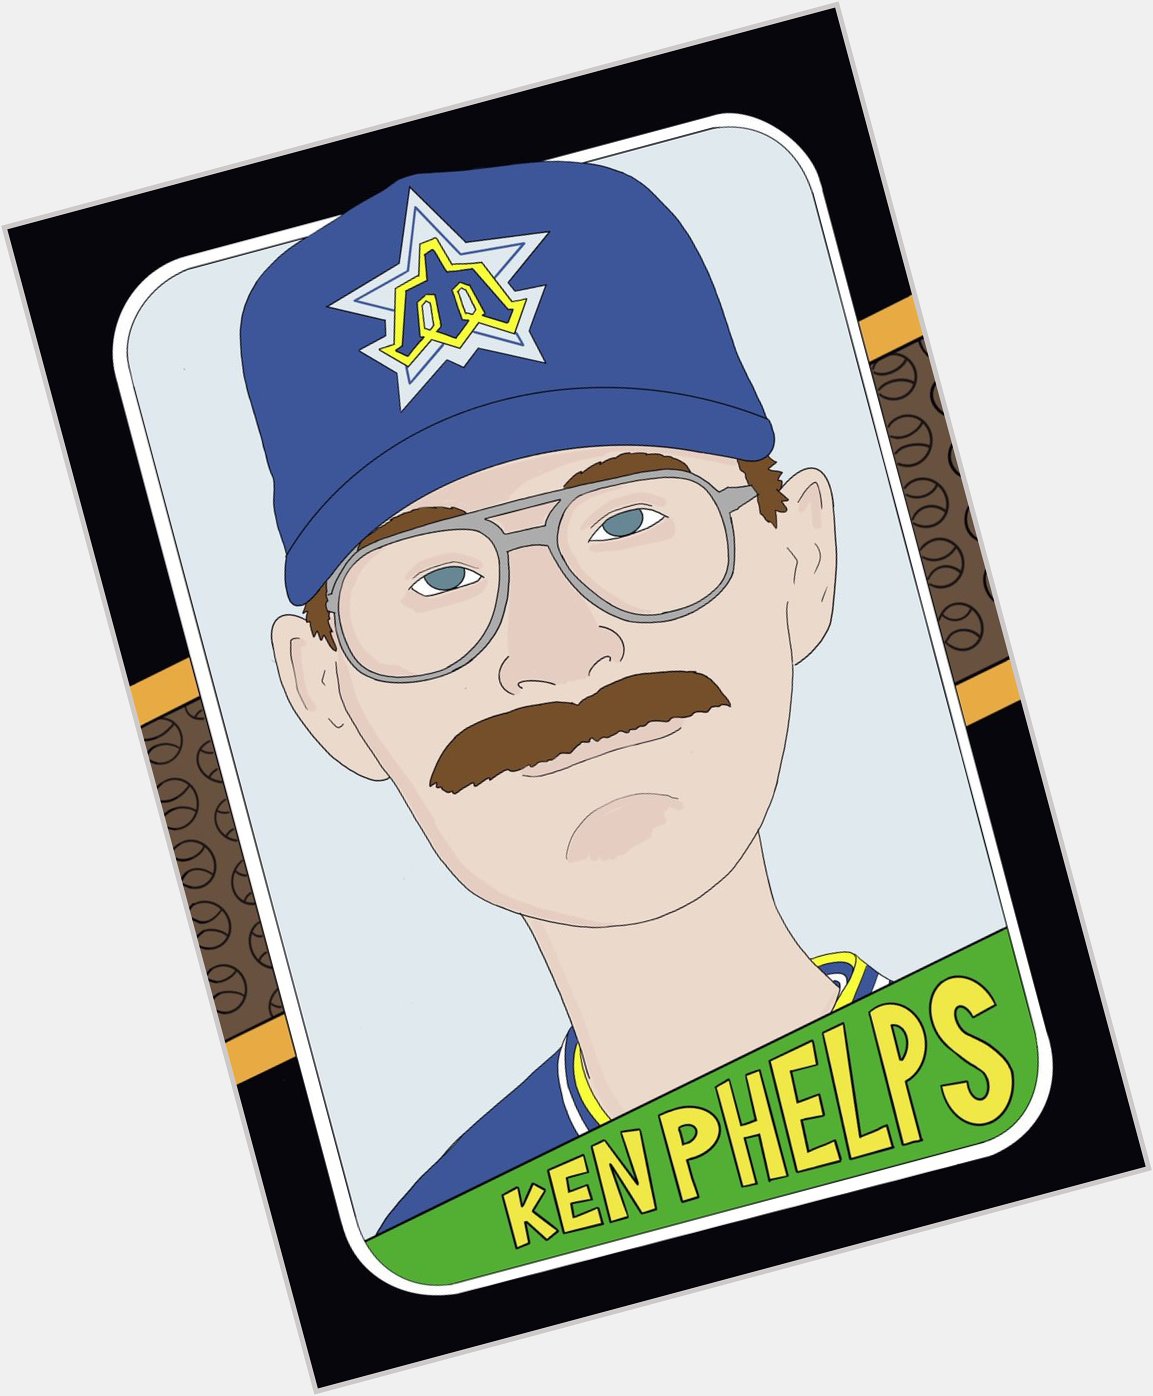 Happy Birthday Jay Buhner. I haven t drawn him so here is Ken Phelps. You re welcome! 